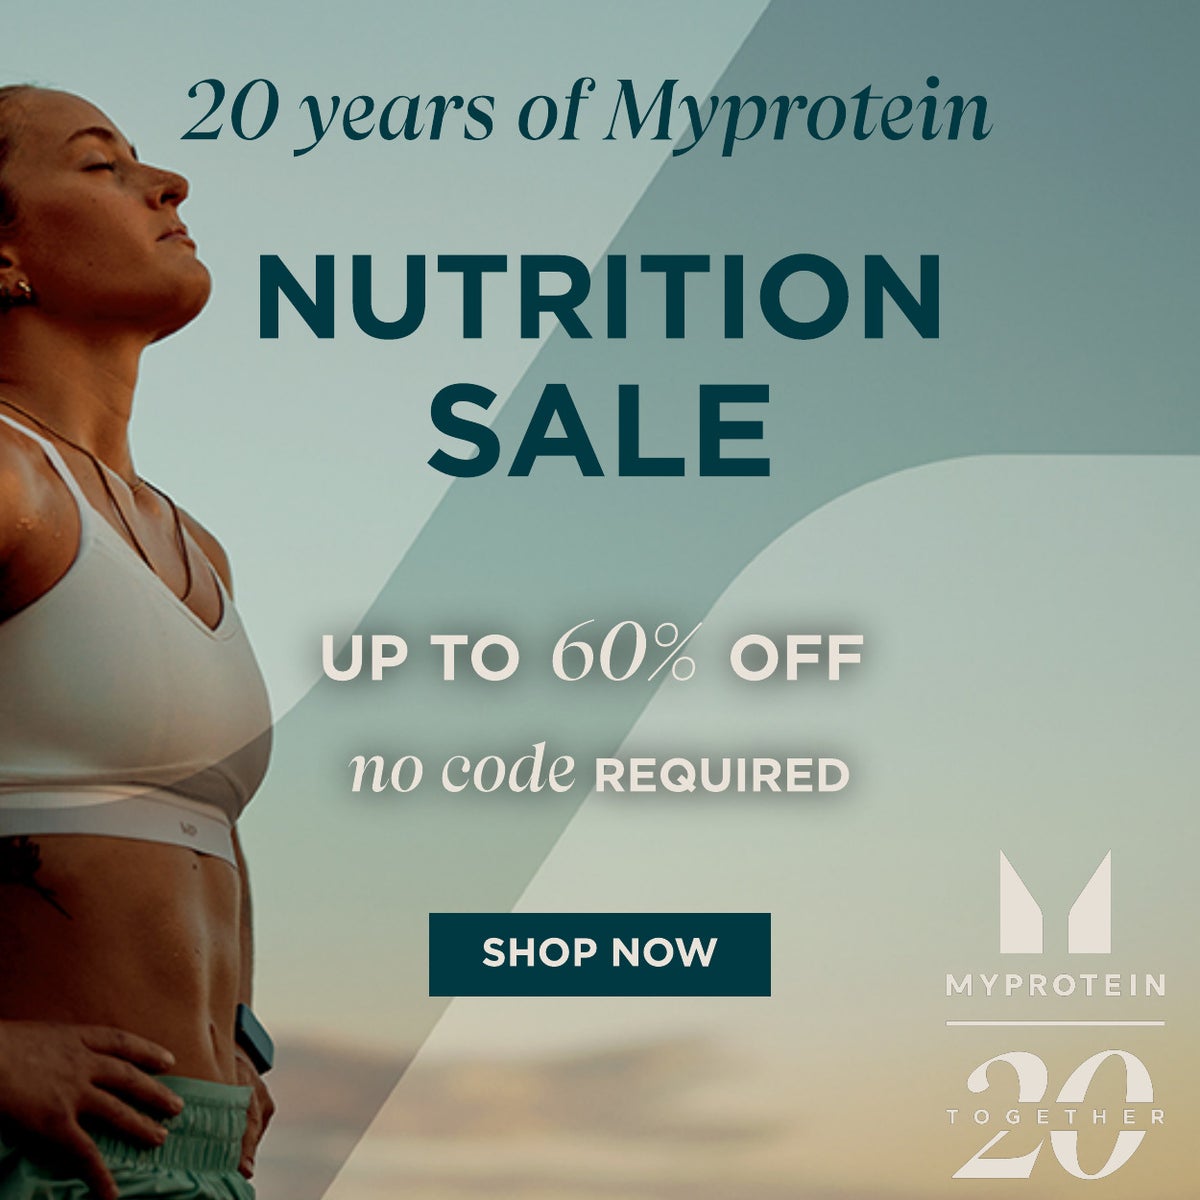 Nutrition sale. Up to 60% off * Discount applies to product rrp at basket. shop now.